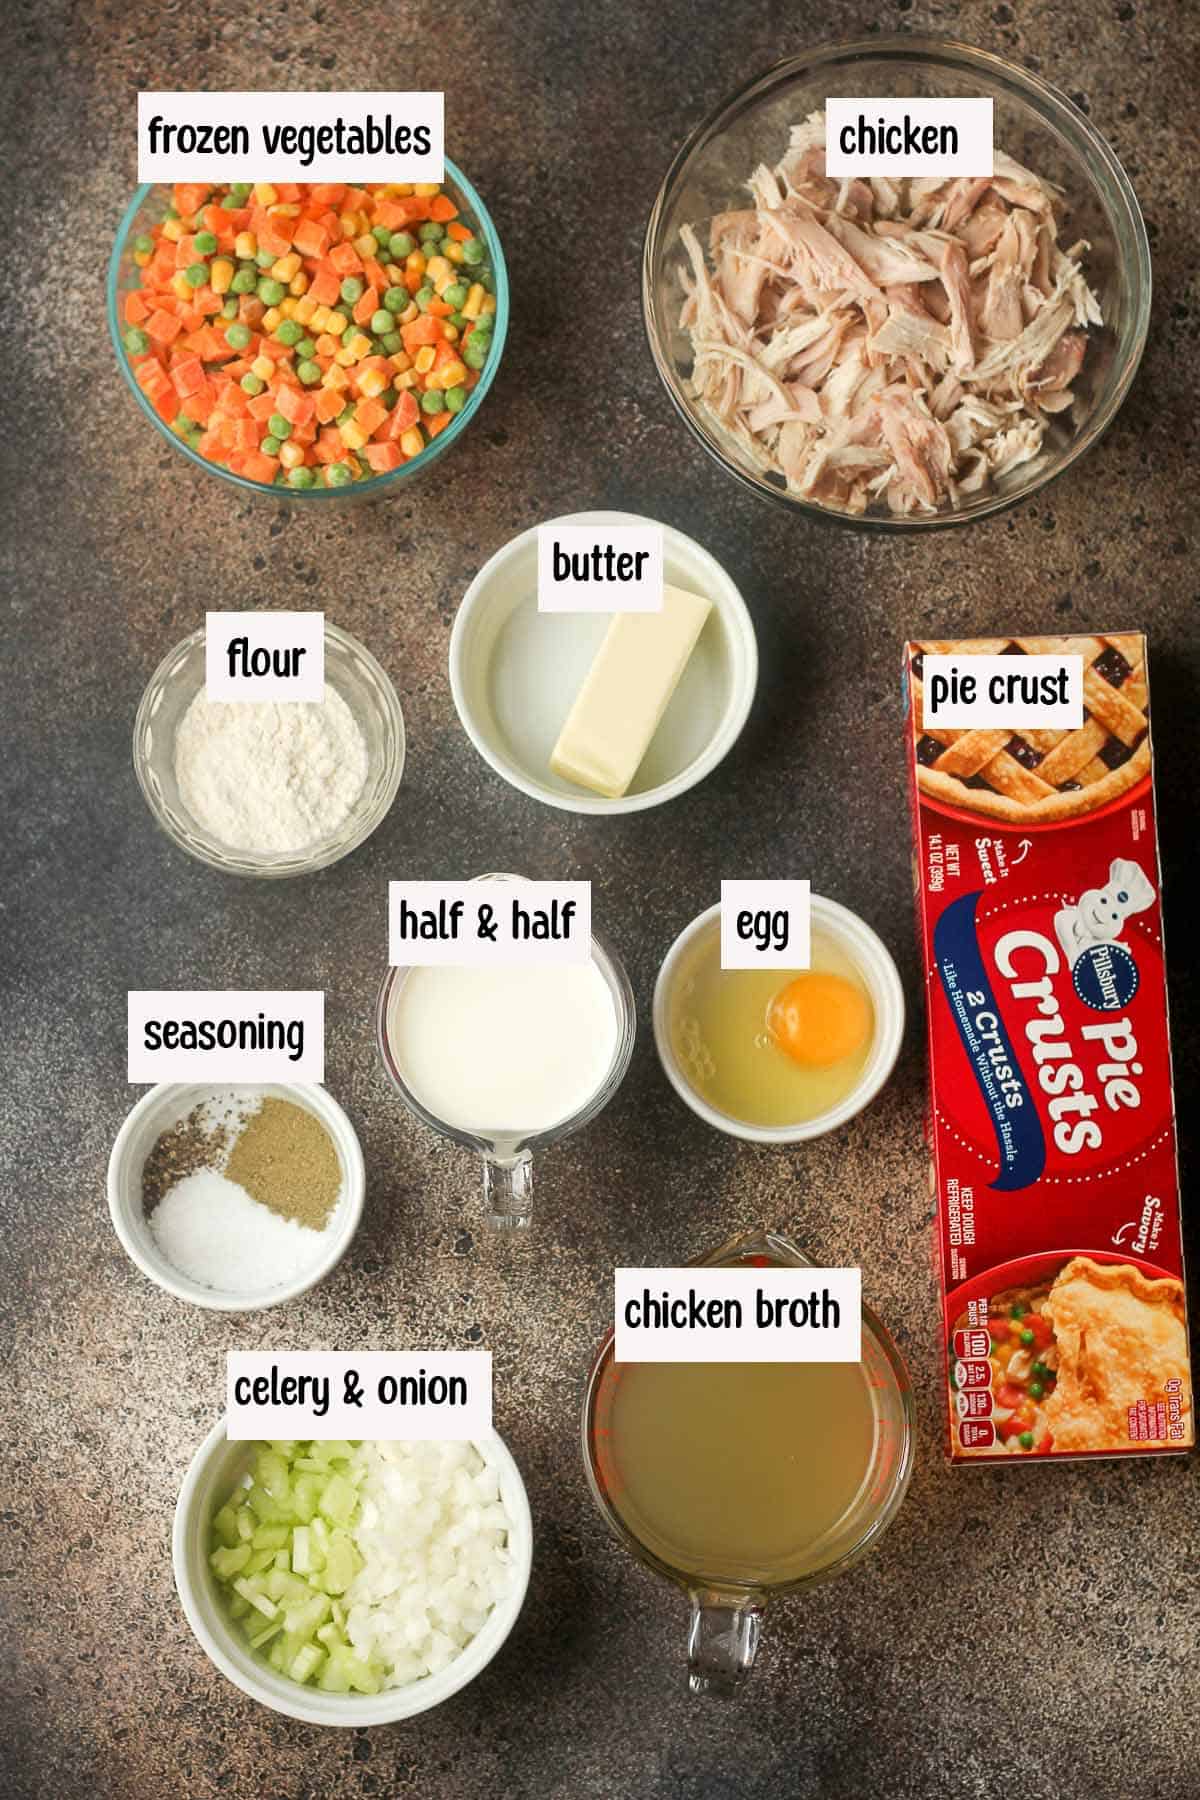 The ingredients for the chicken pot pie with semi-homemade crust.